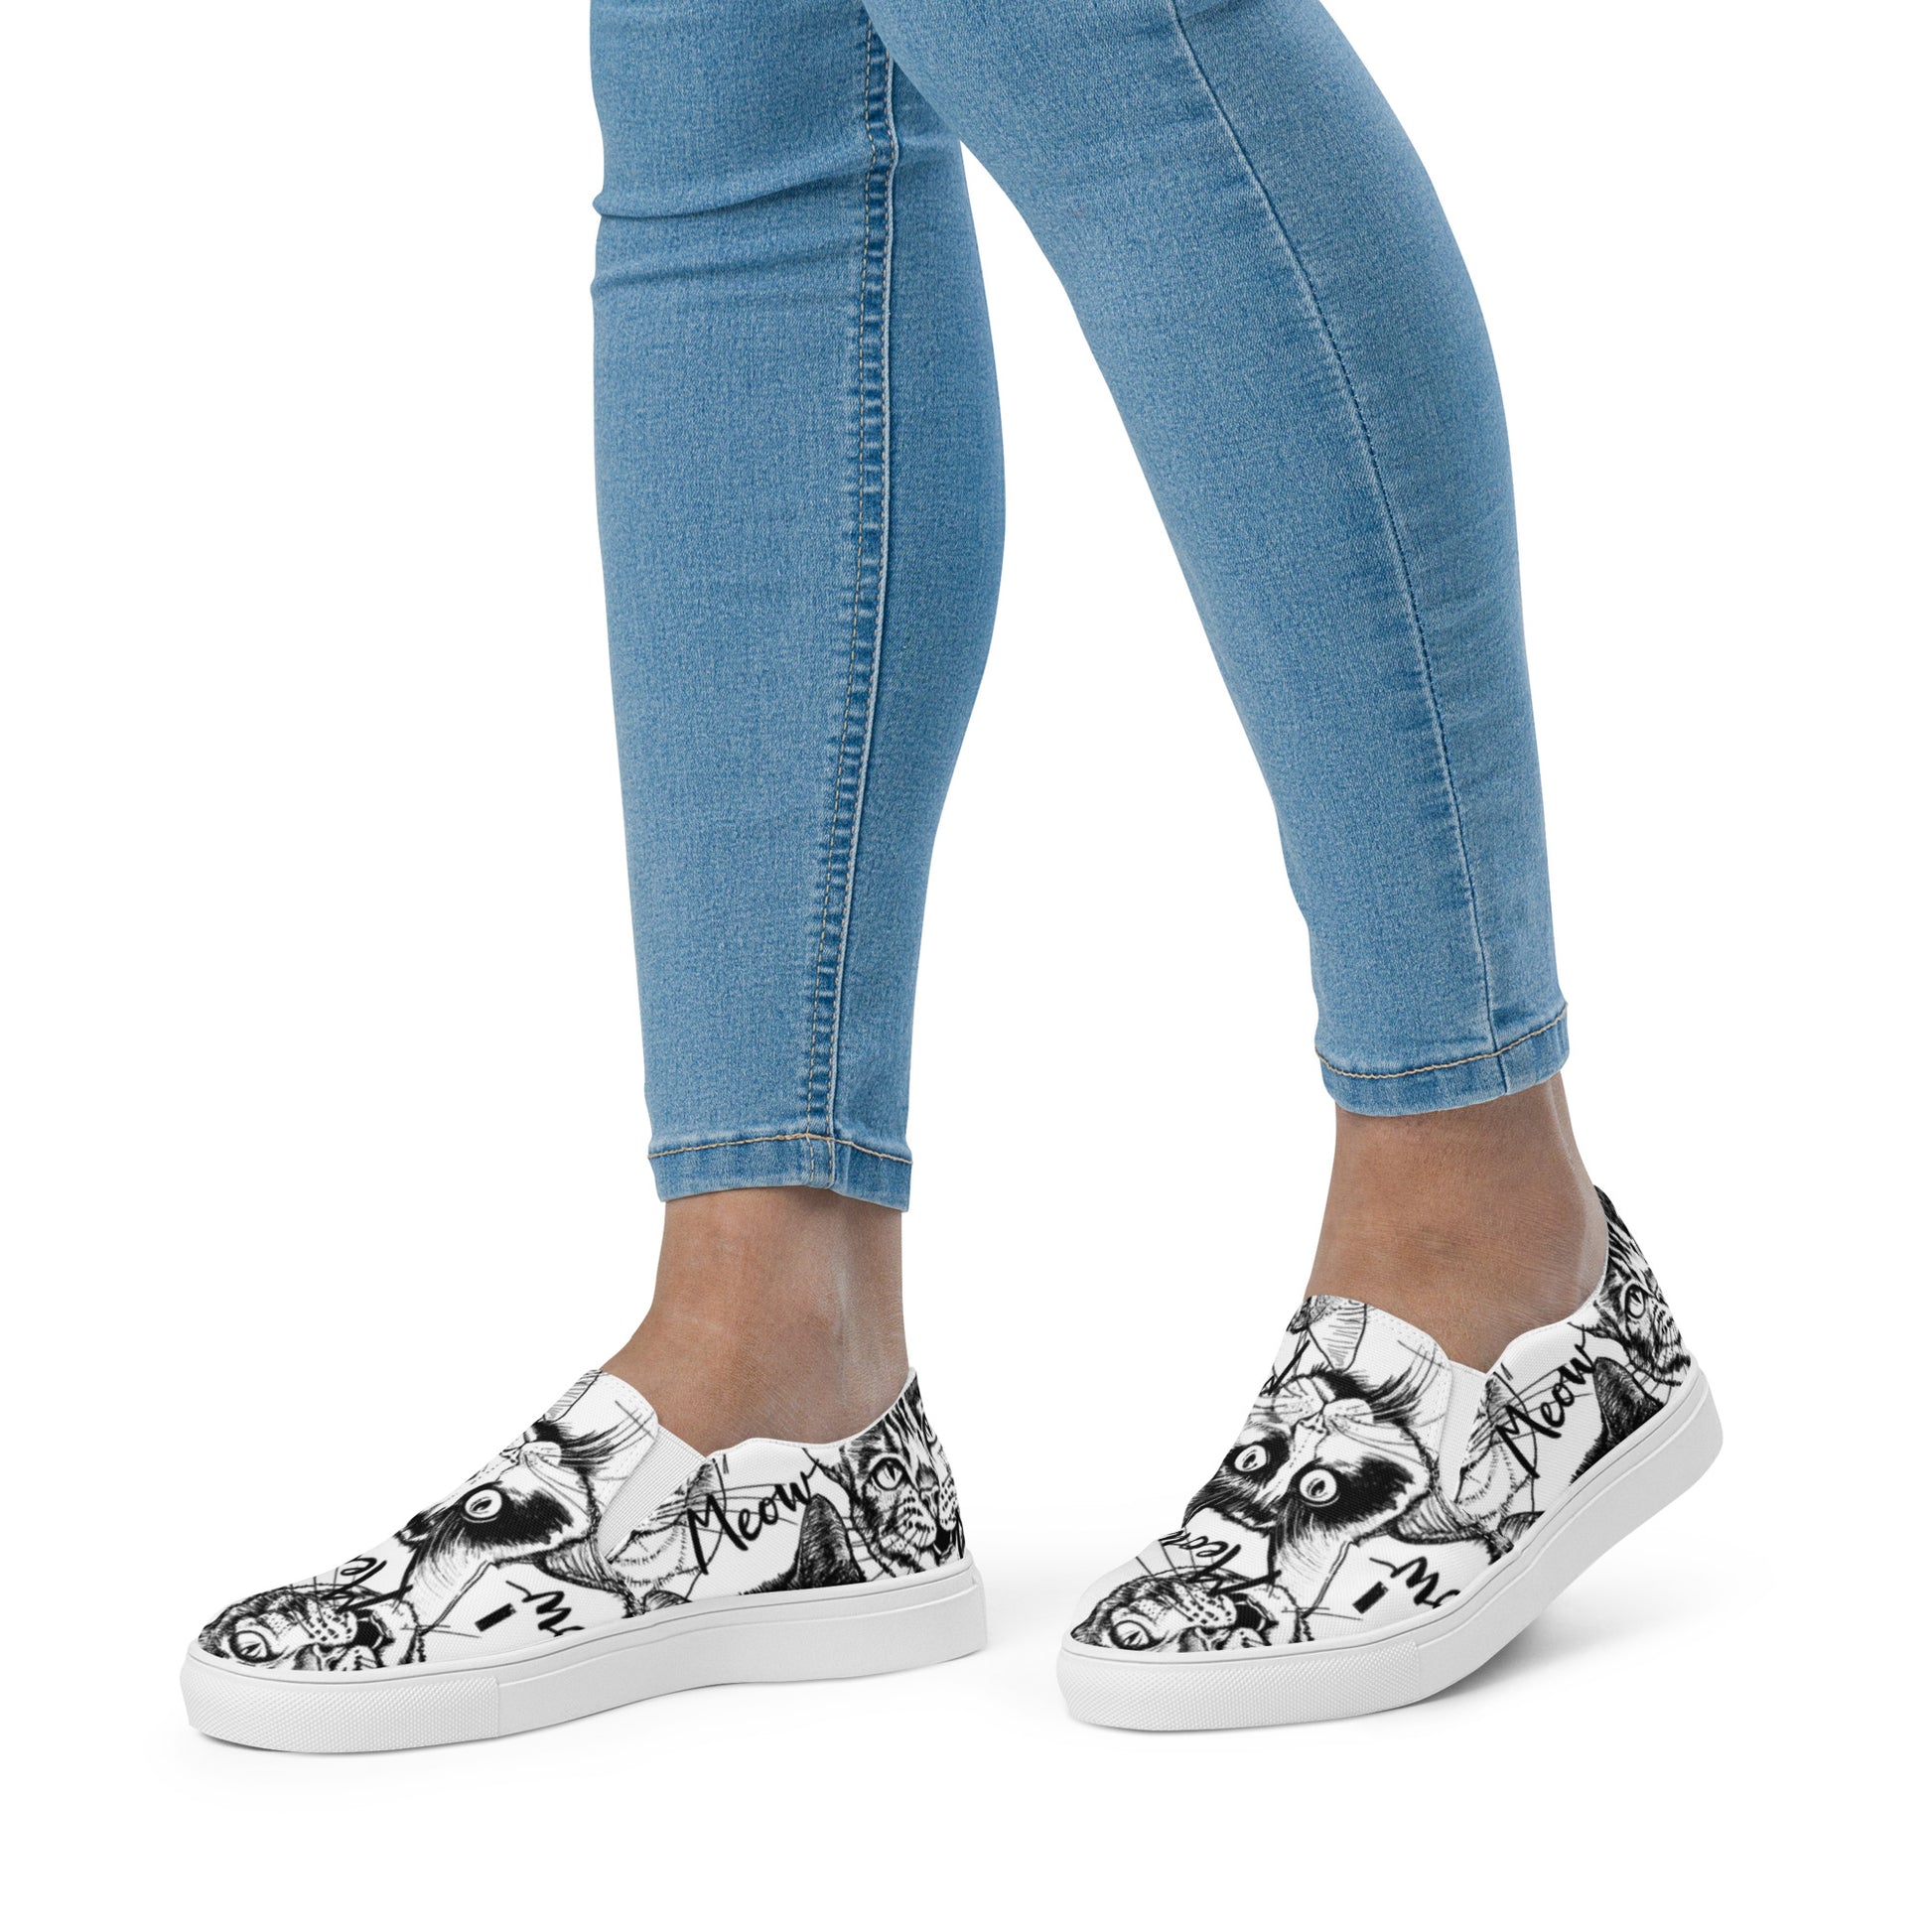 Meow Cat print Women’s slip-on shoes - Sport Finesse